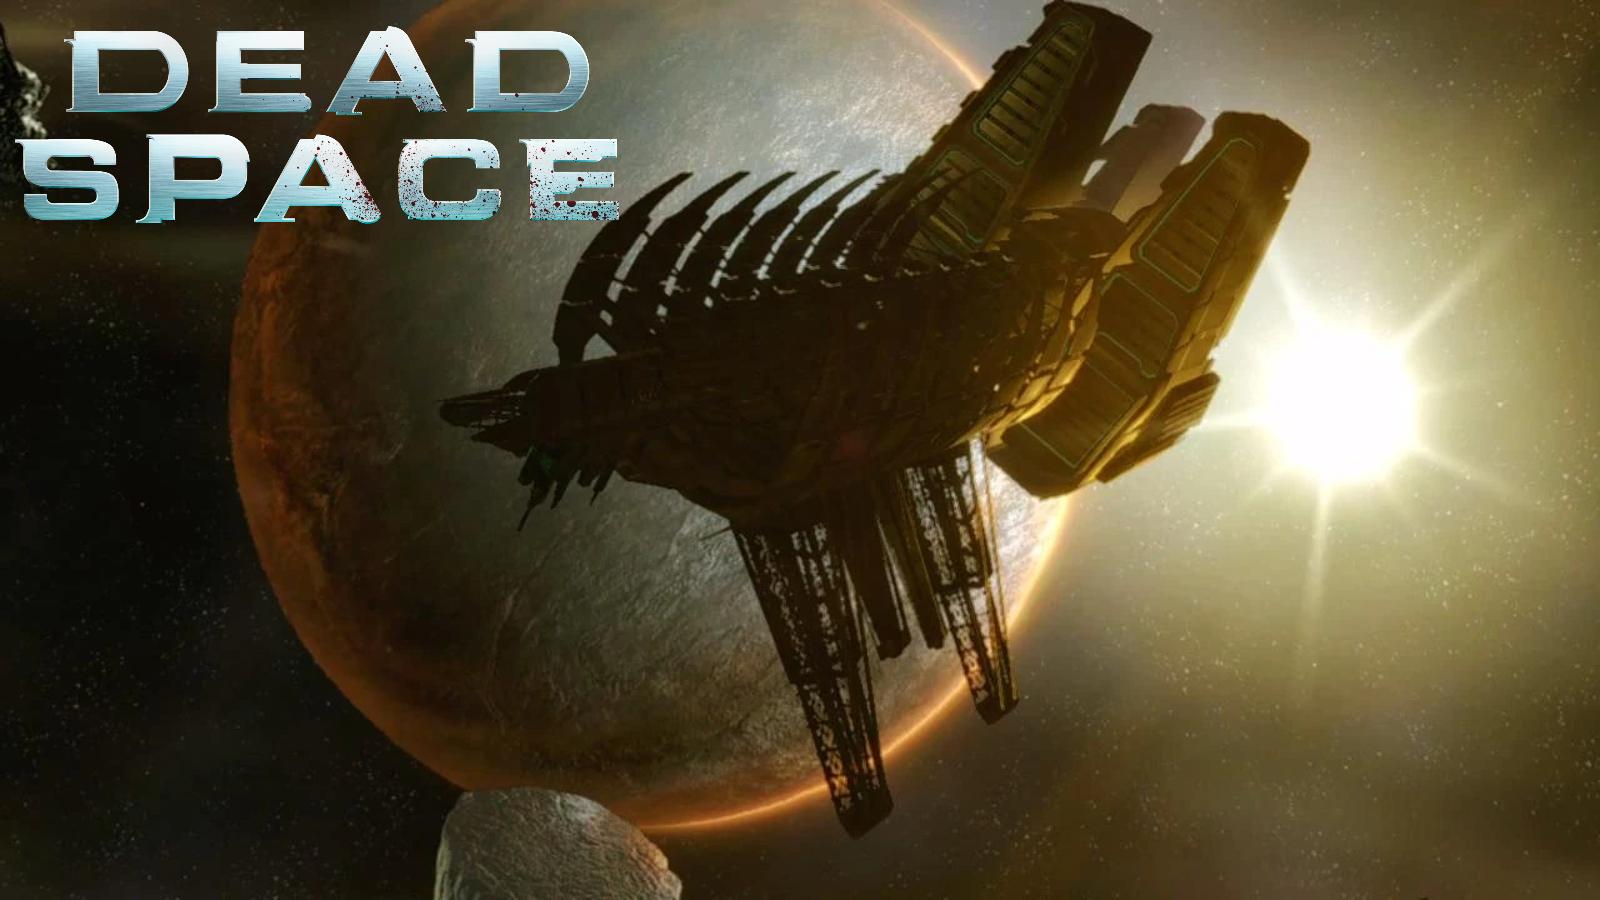 Dead Space remake changes